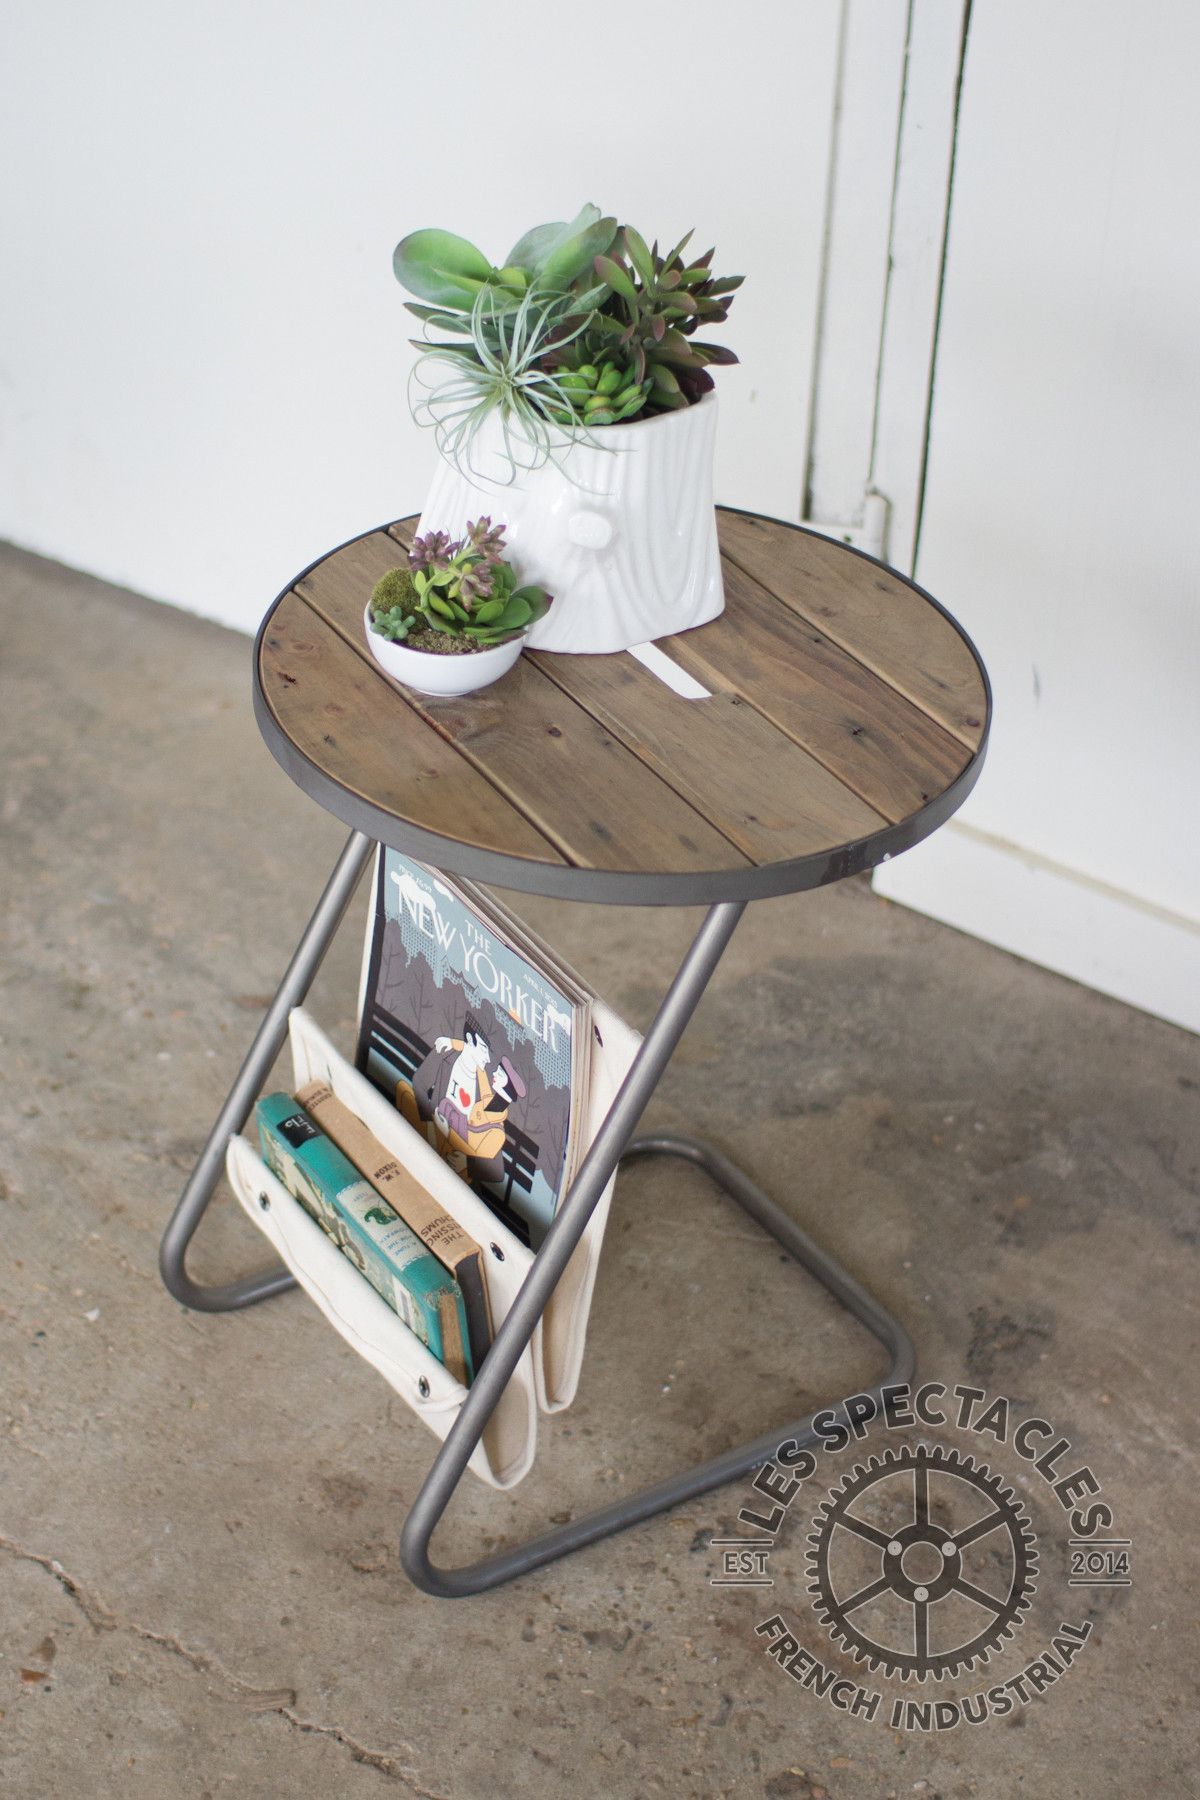 round iron wood side table with magazine hammock living room accent ikea storage furniture resin wicker patio teal kitchen decor comfy timber trestle legs carpet door trim modern